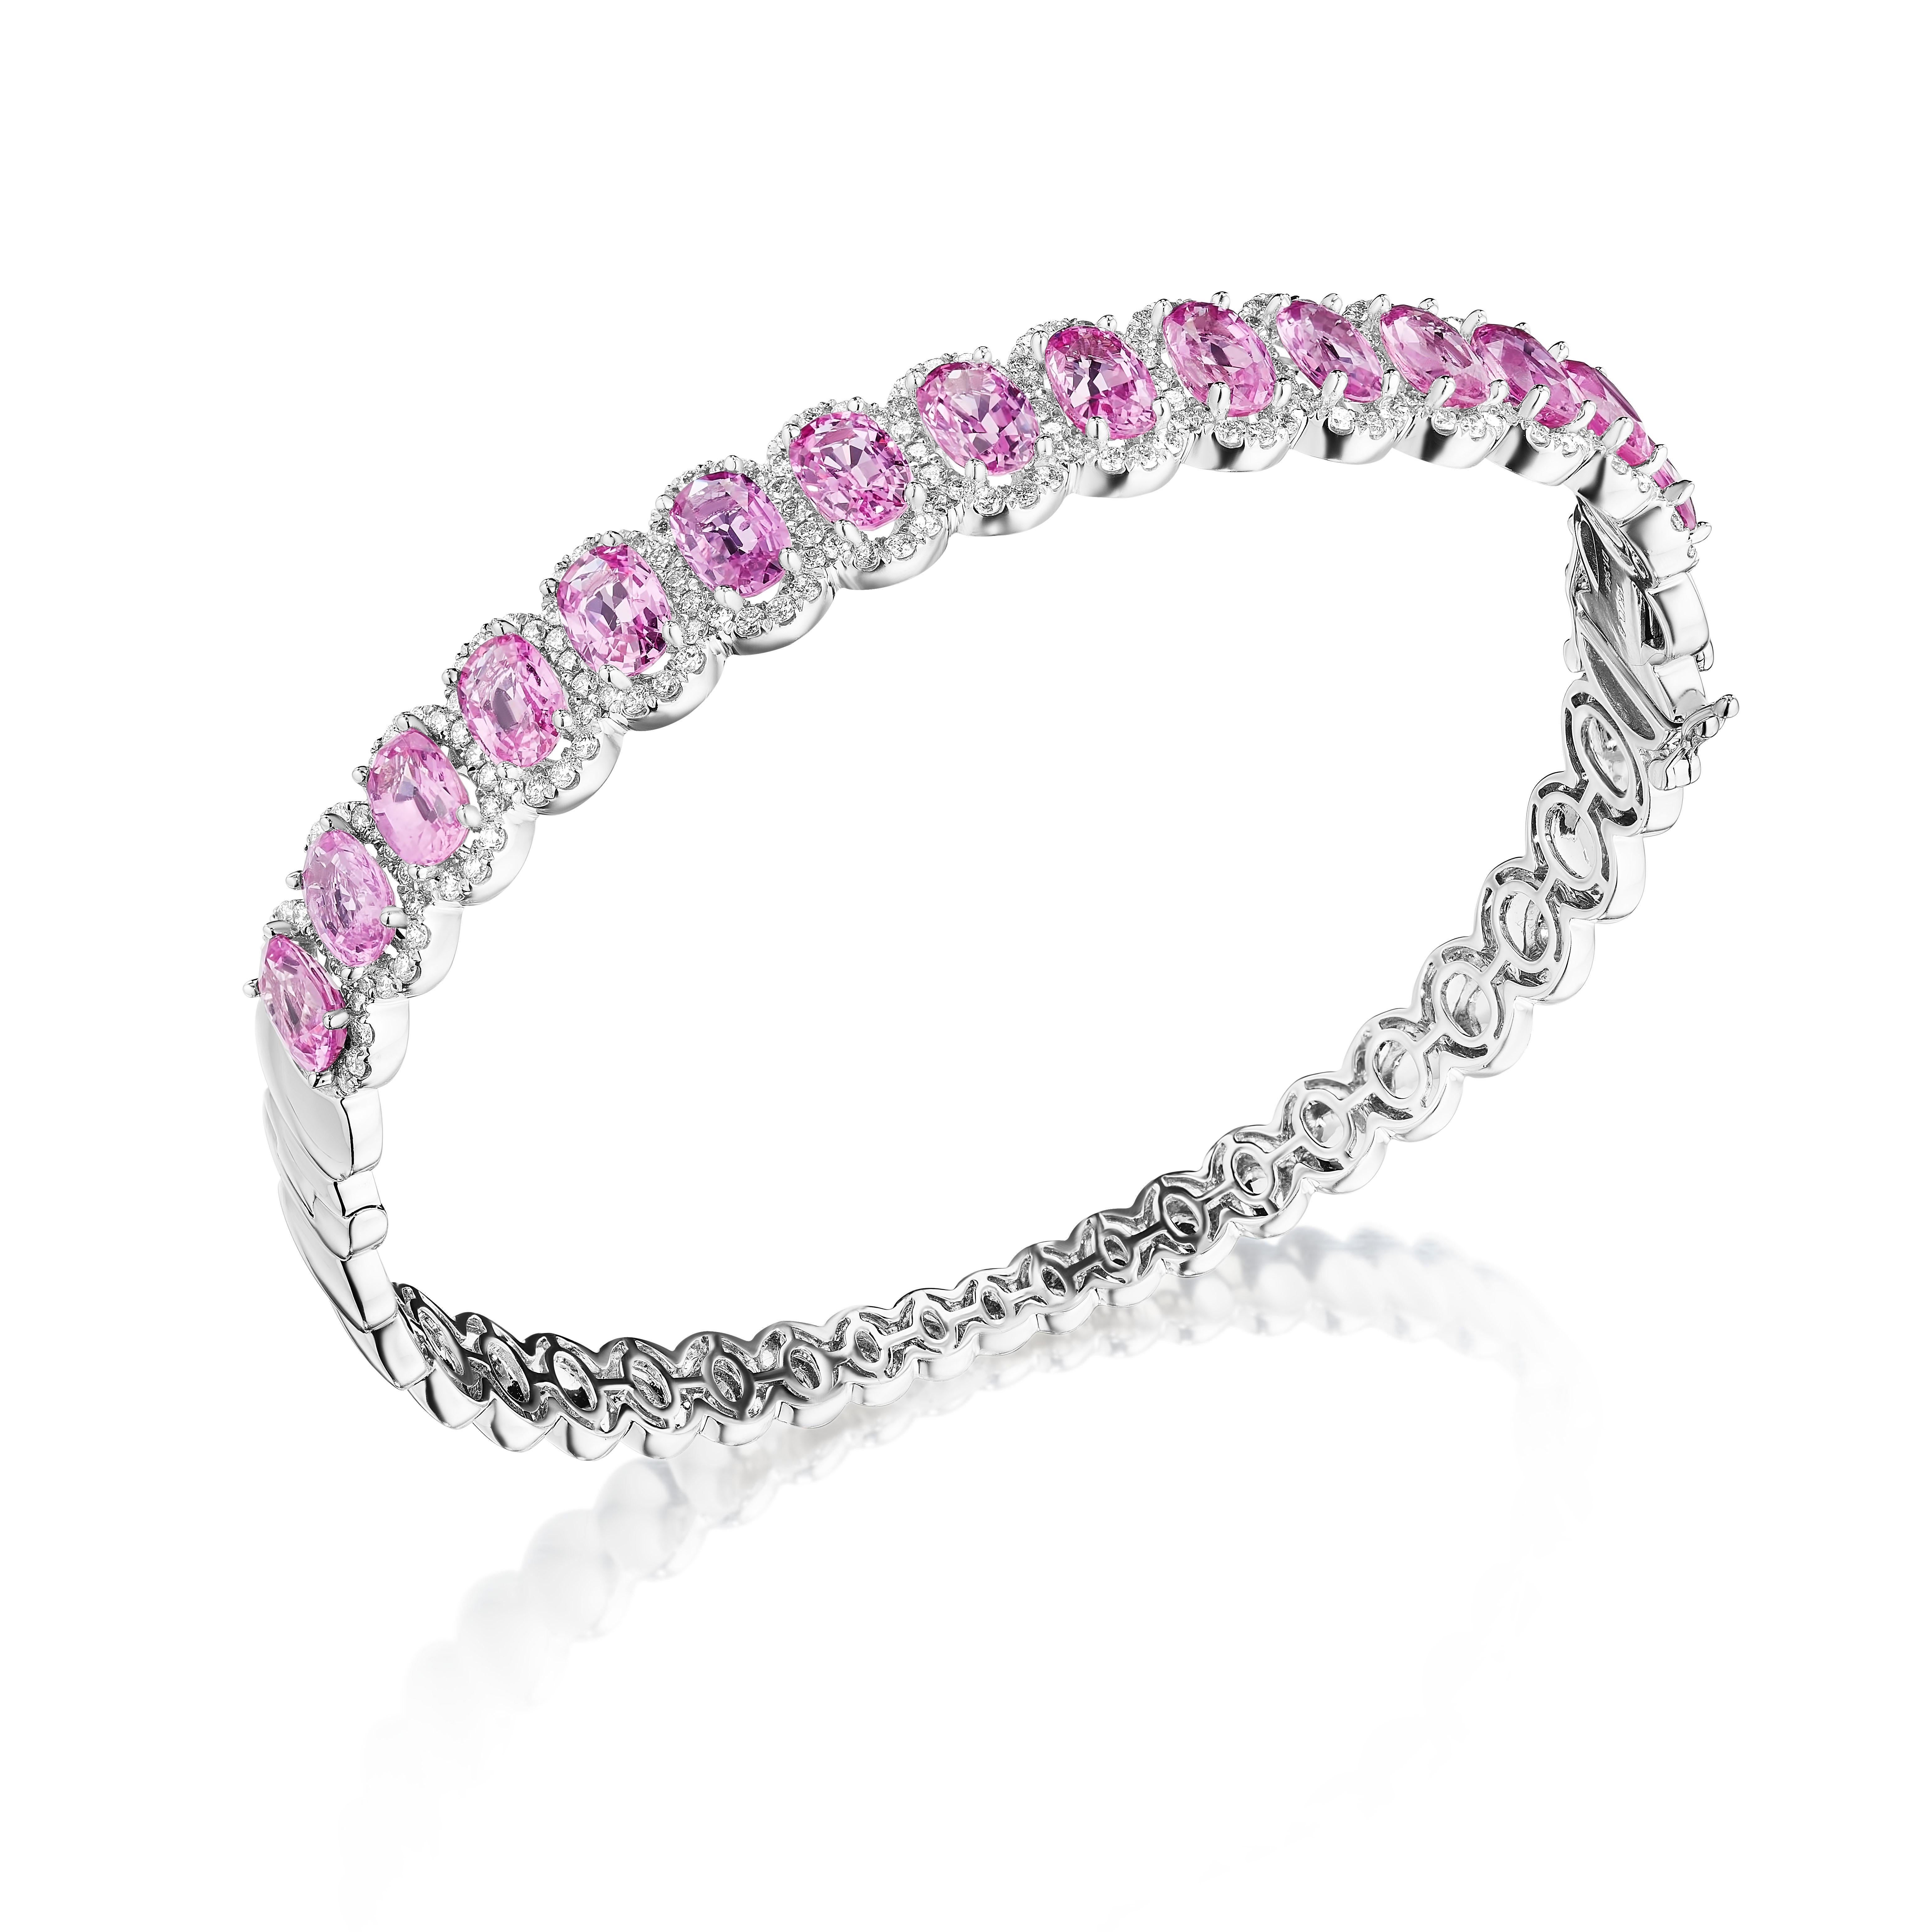 • A truly exquisite assortment of 15 oval cut pink sapphires is framed by delicate halos made of round brilliant cut diamonds in this beautiful bangle. The stones are set in 14KT white gold and have a combining total weight of approximately 10.35